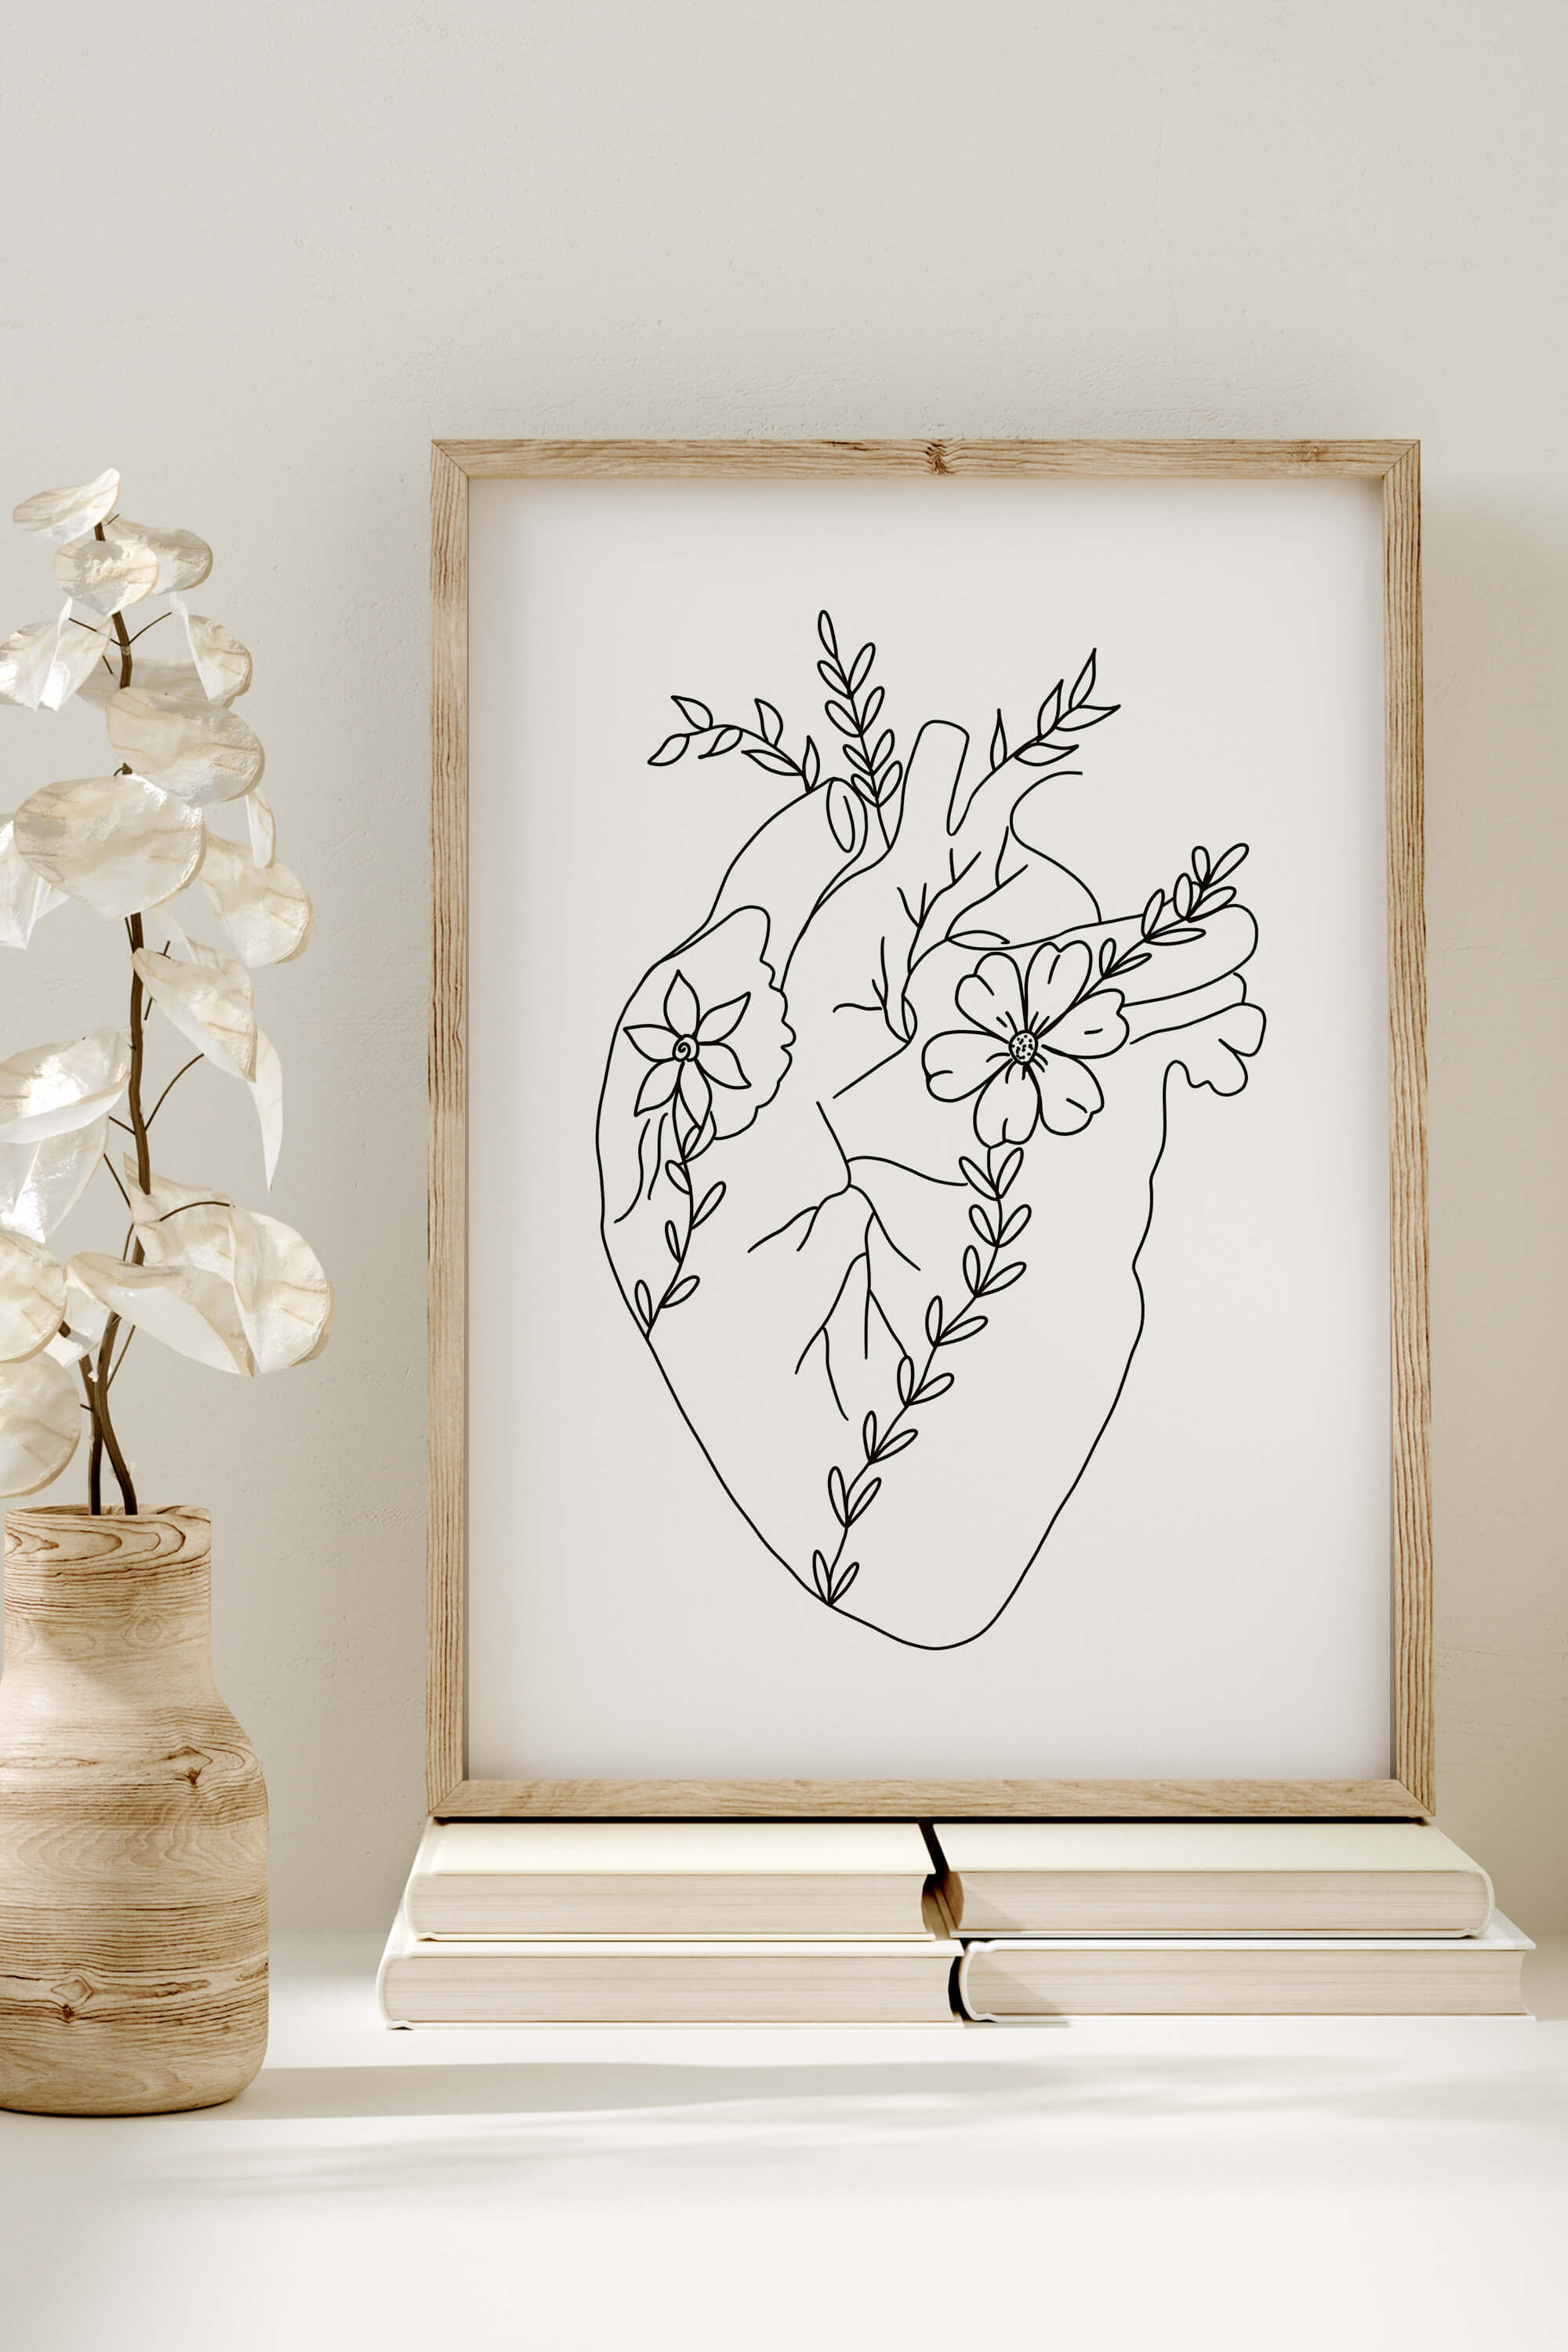 Romantic flower heart artwork - A beautiful portrayal of love and nature, where vibrant florals intertwine to create a heart-shaped masterpiece.